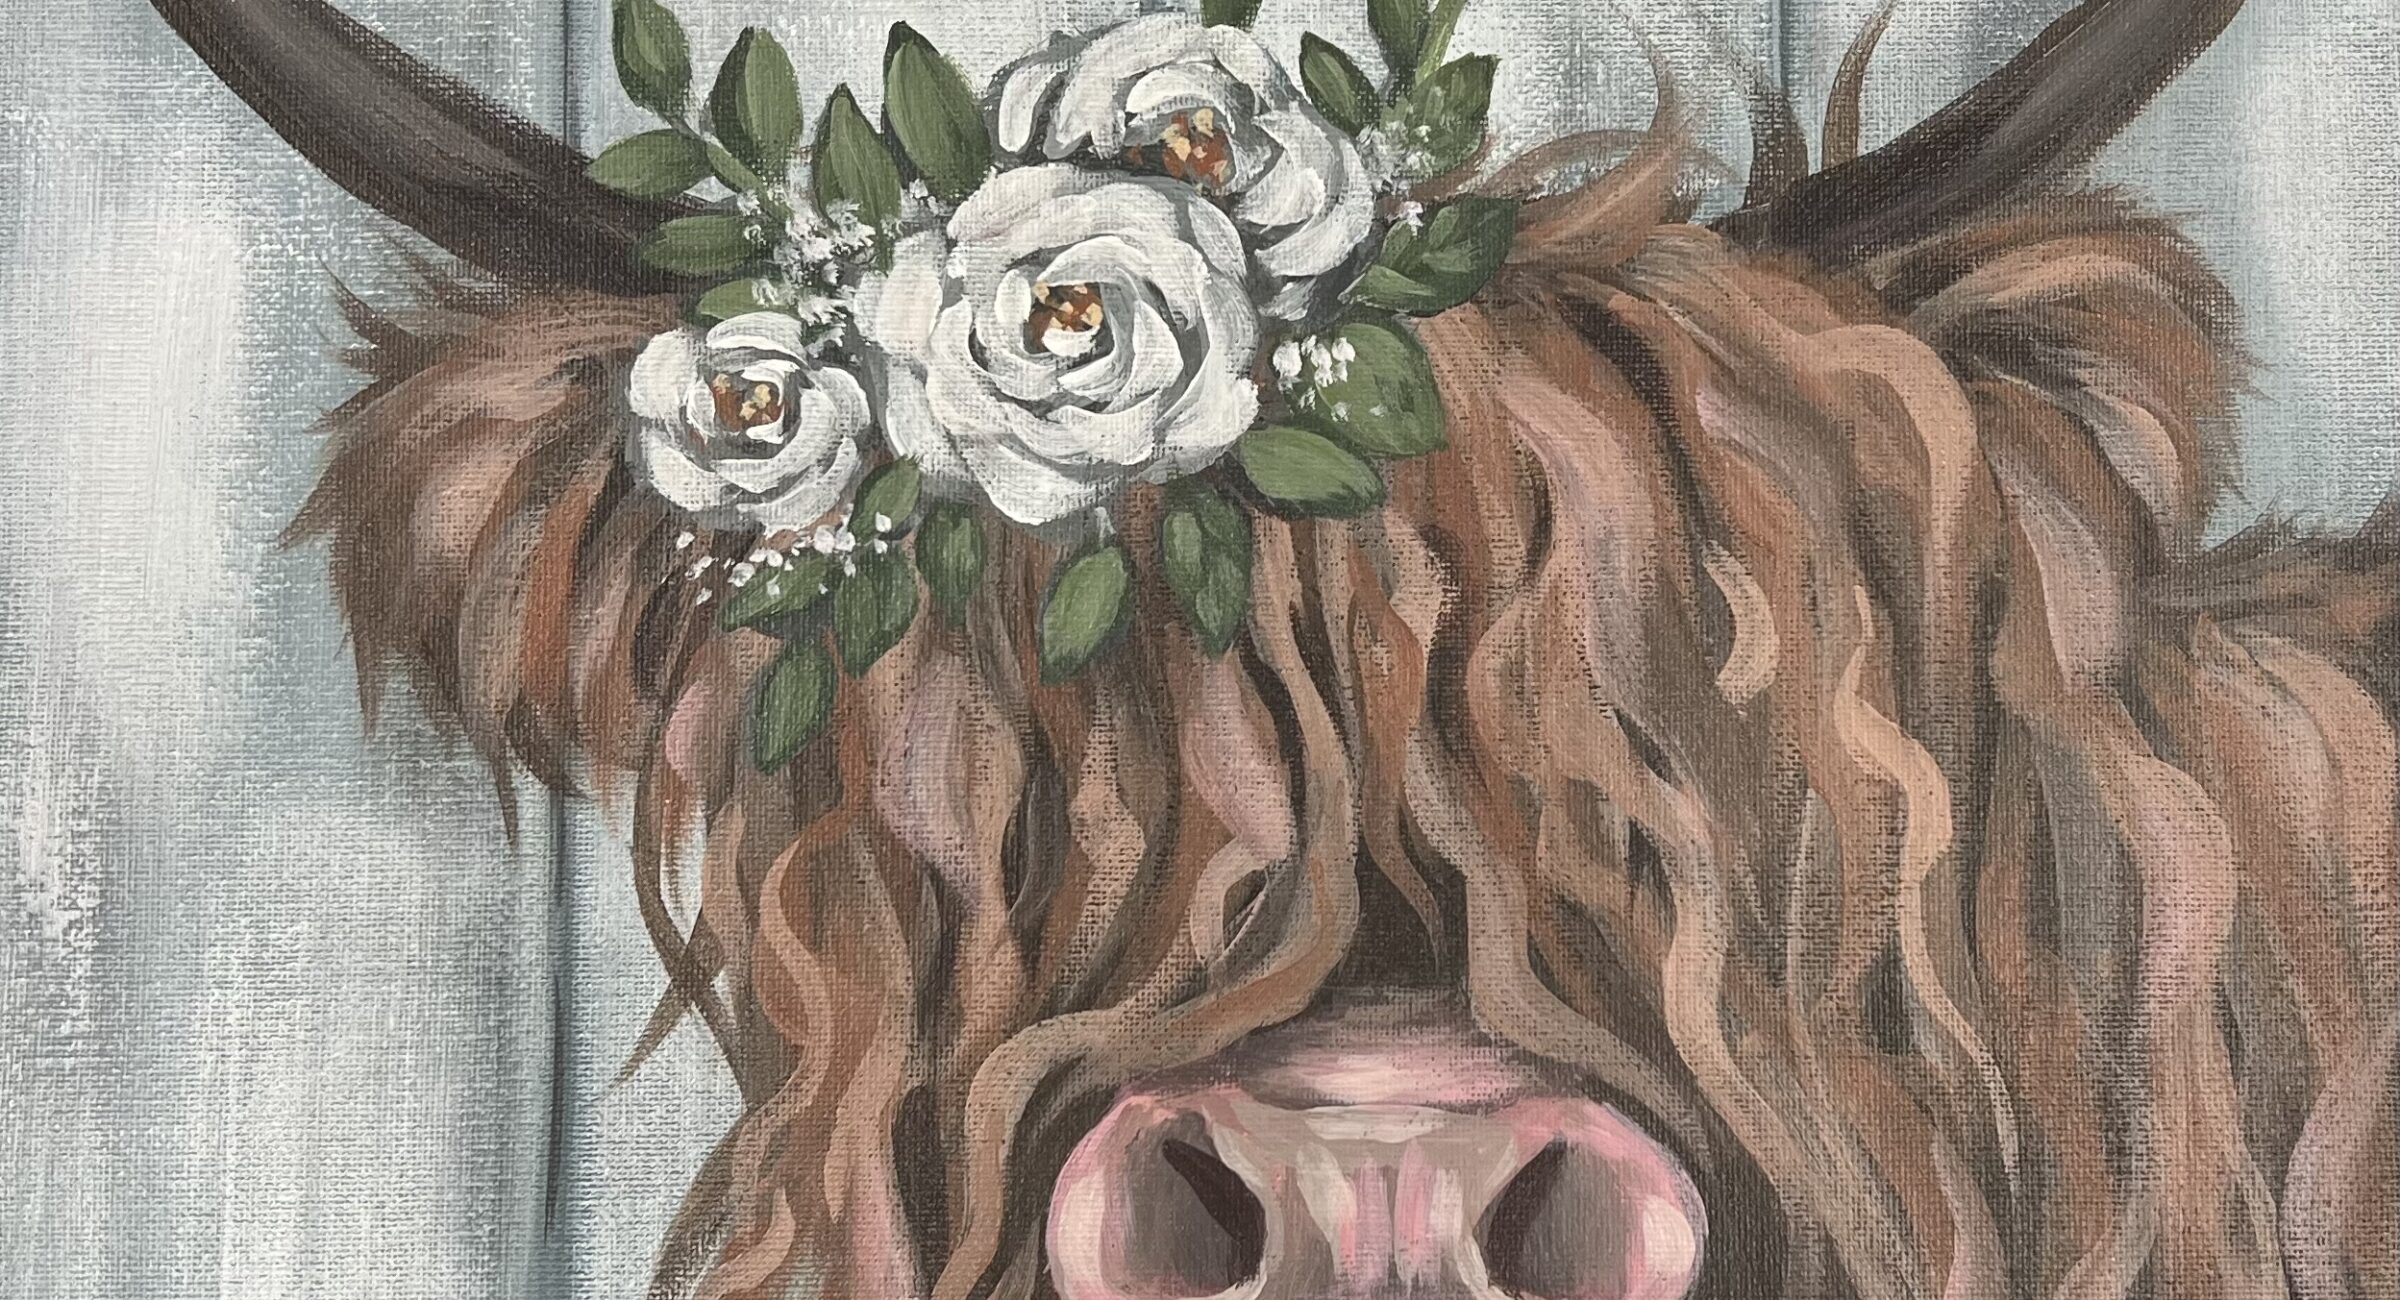 July 14-Paint & Pick at VonThun Farms! of a shaggy highland cow with white flowers and green leaves on its head, set against a striped gray background.